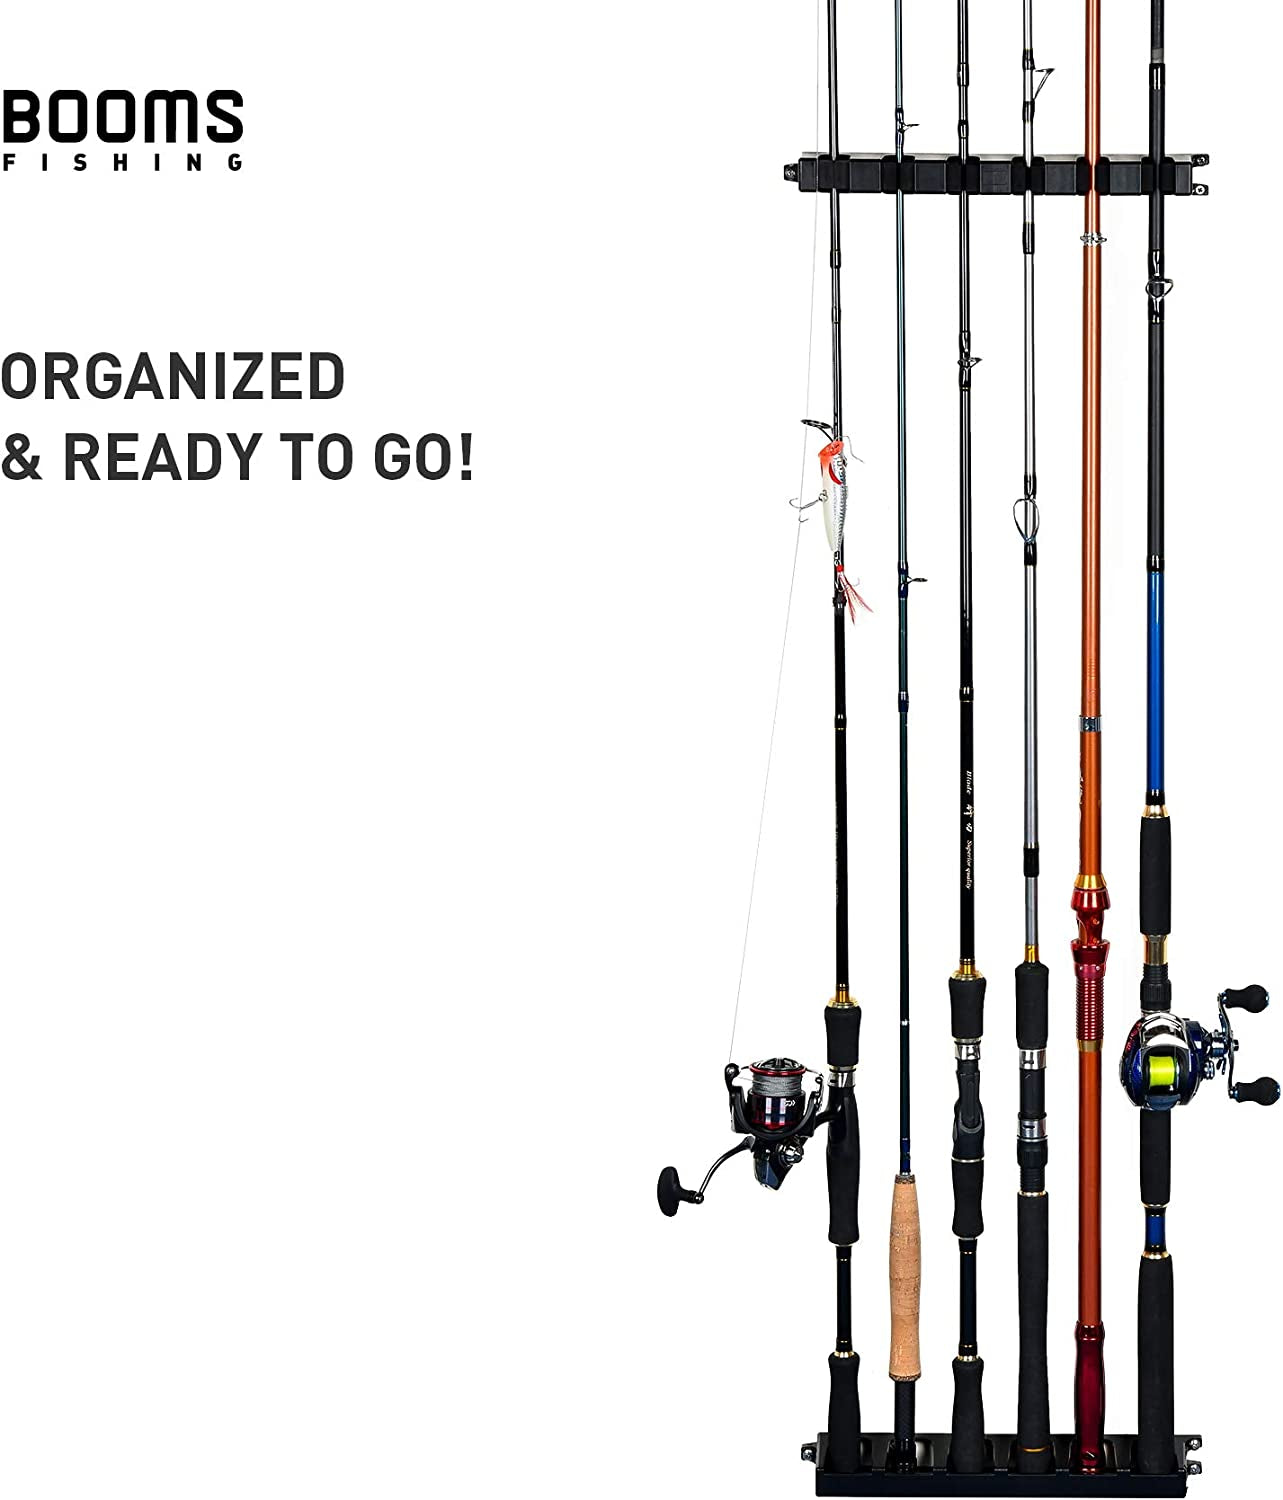 WV2 Fishing Pole Holder Wall Mount, Vertical Fishing Rod Holders, Fishing Pole Rack for Garage, 13.6” Fishing Rod Rack Holds up to 6 Rods or Combos, Easy to Install